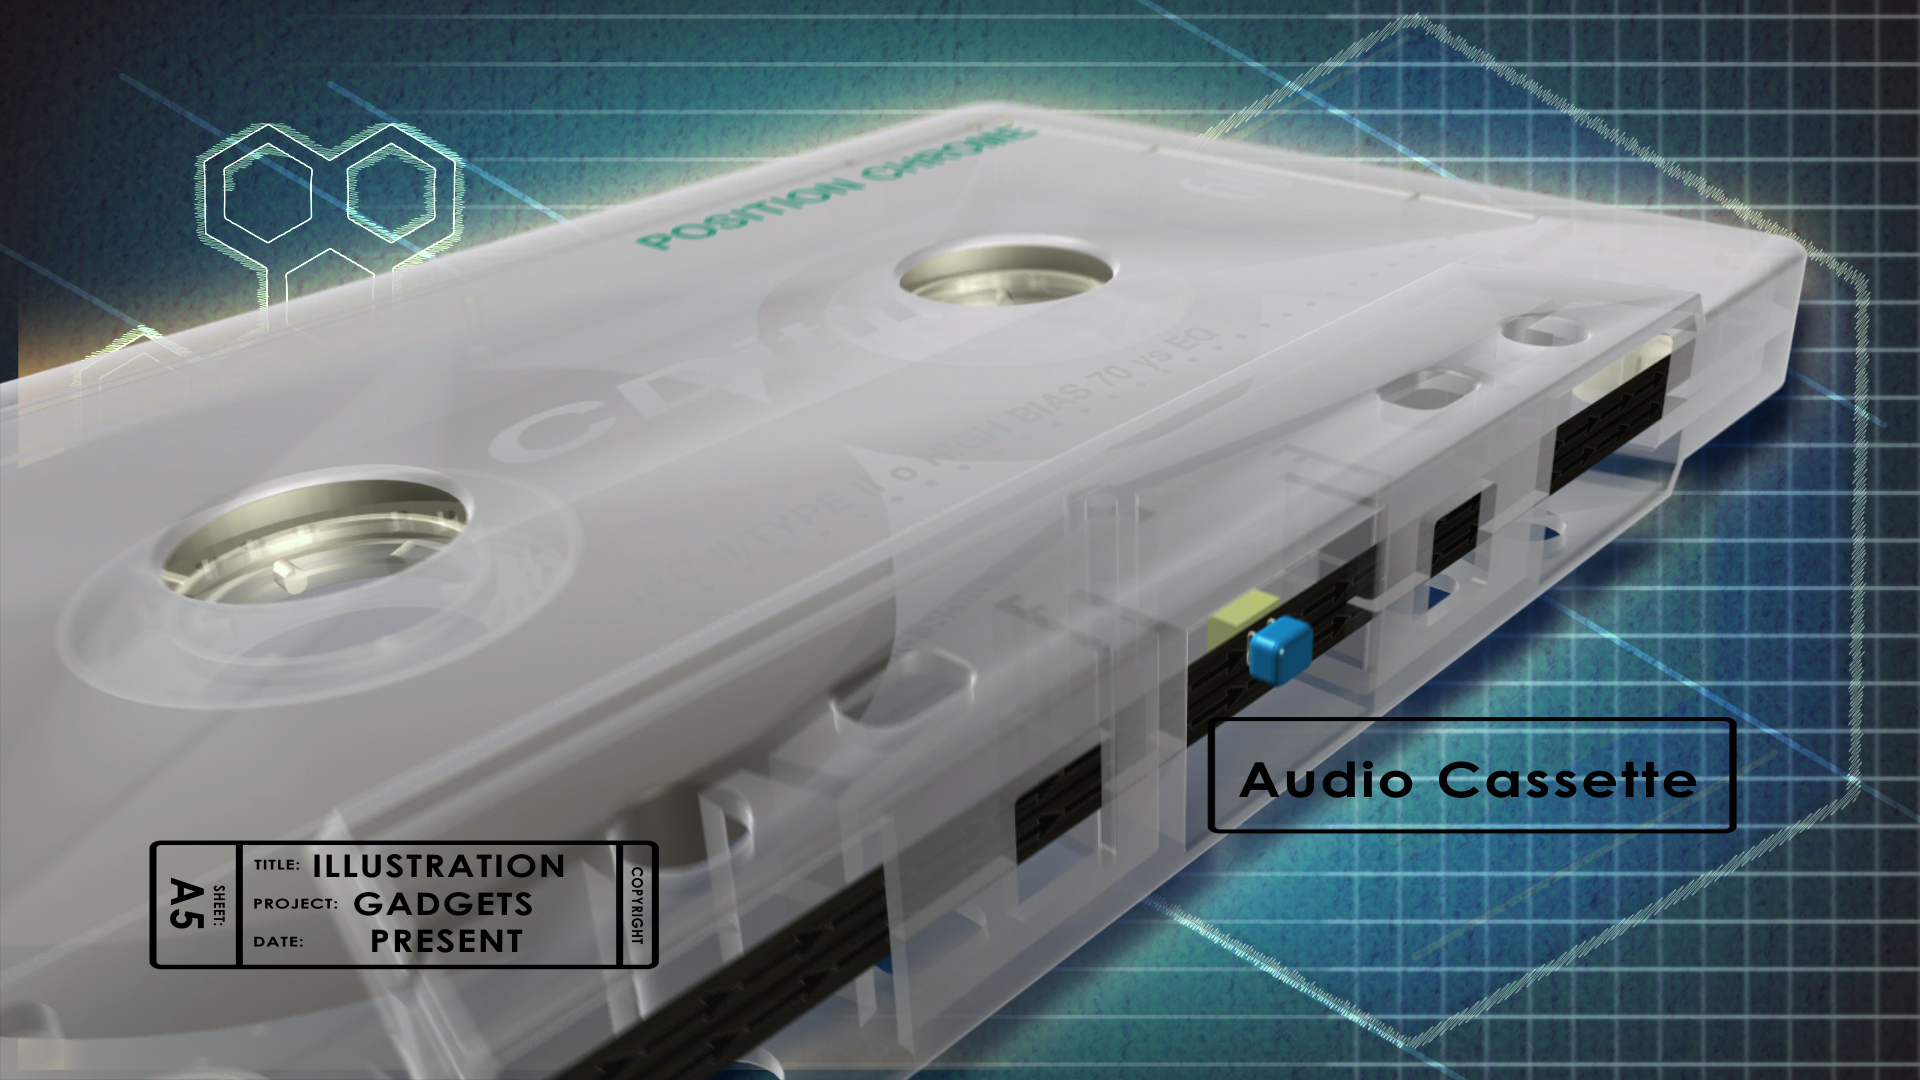 101 gadgets that changed the world - cassette